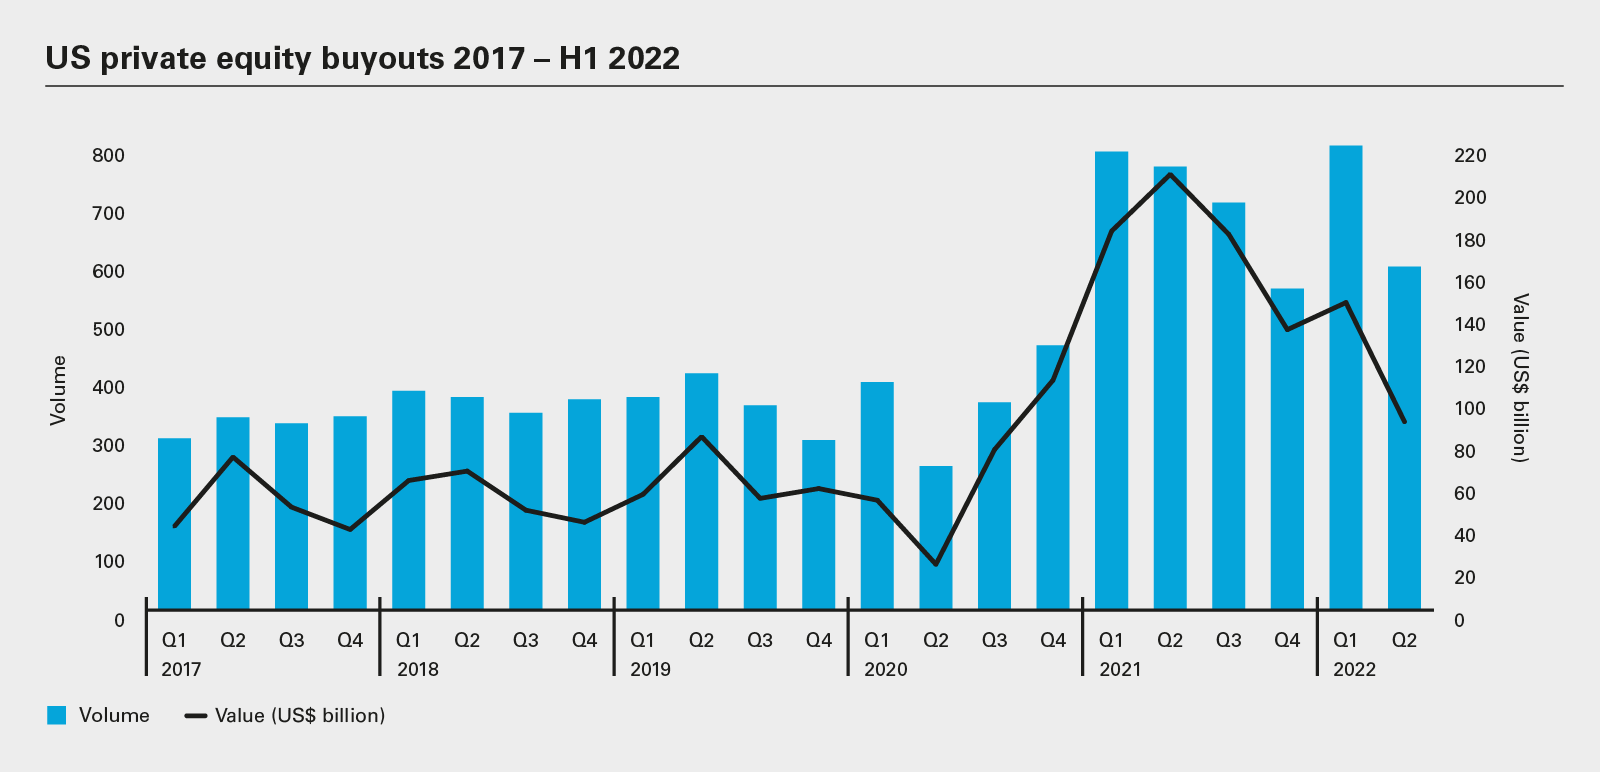 US private equity buyouts 2017 – H1 2022